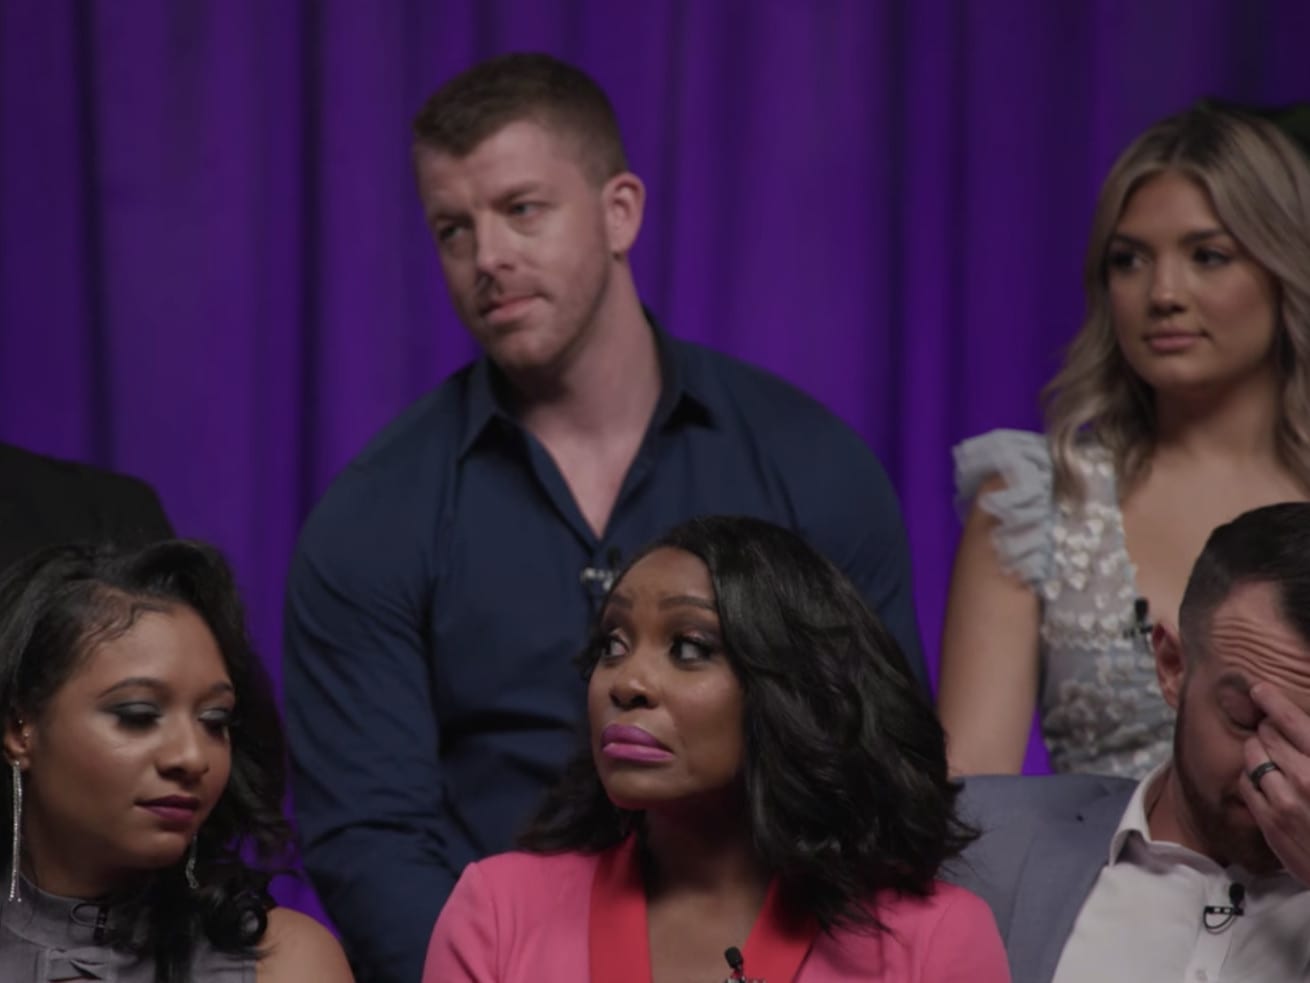 Netflix’s Love Is Blind reunion was a little too nice for such a messy show